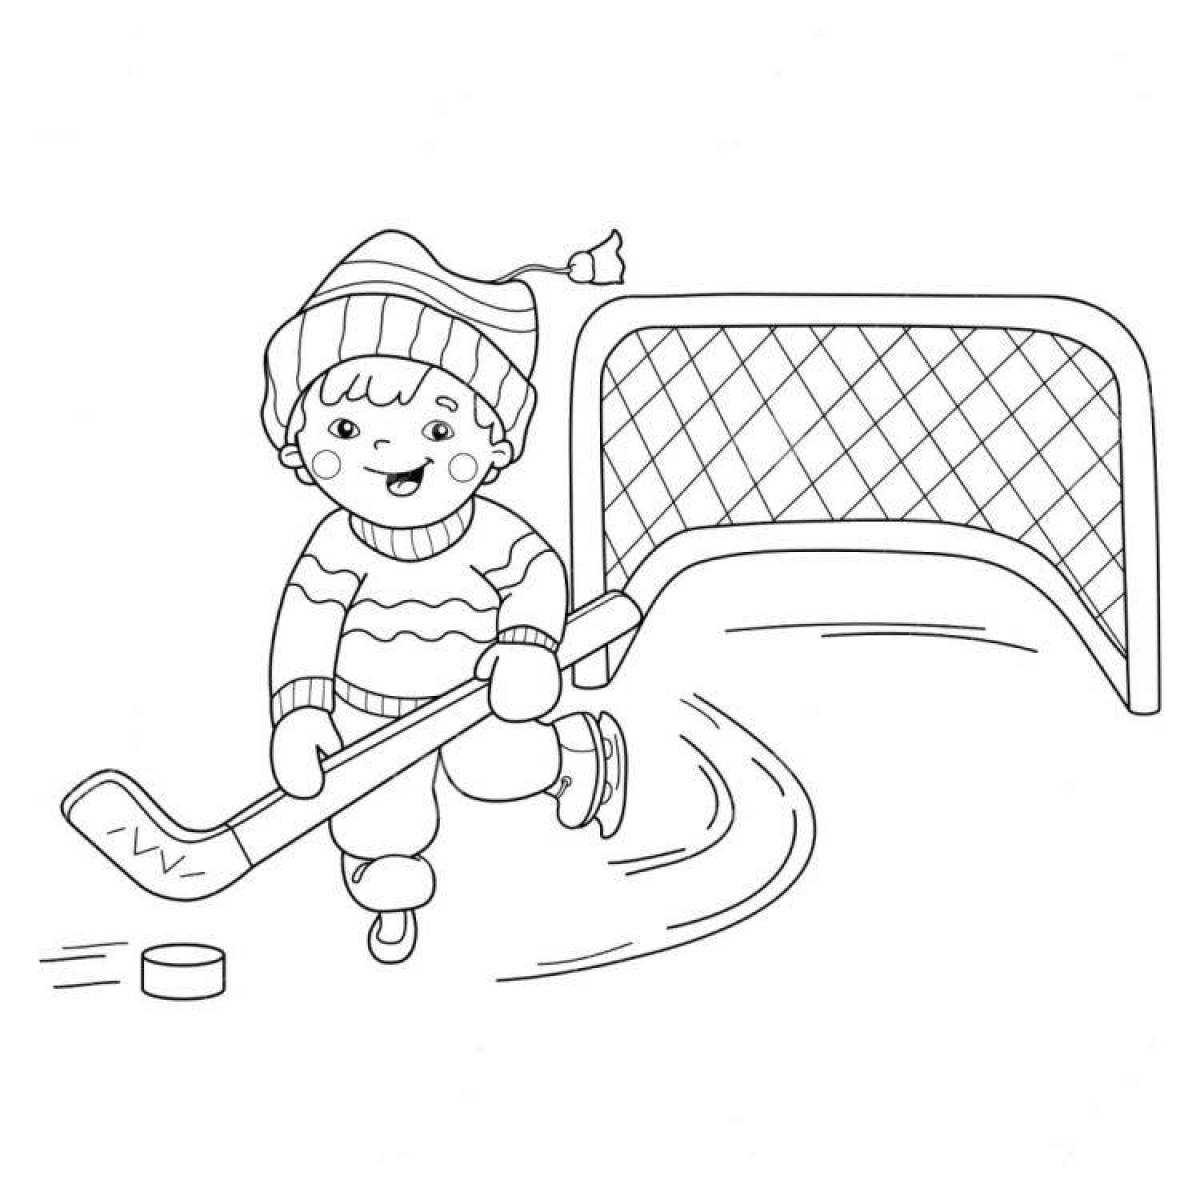 Great winter sports coloring book for kids